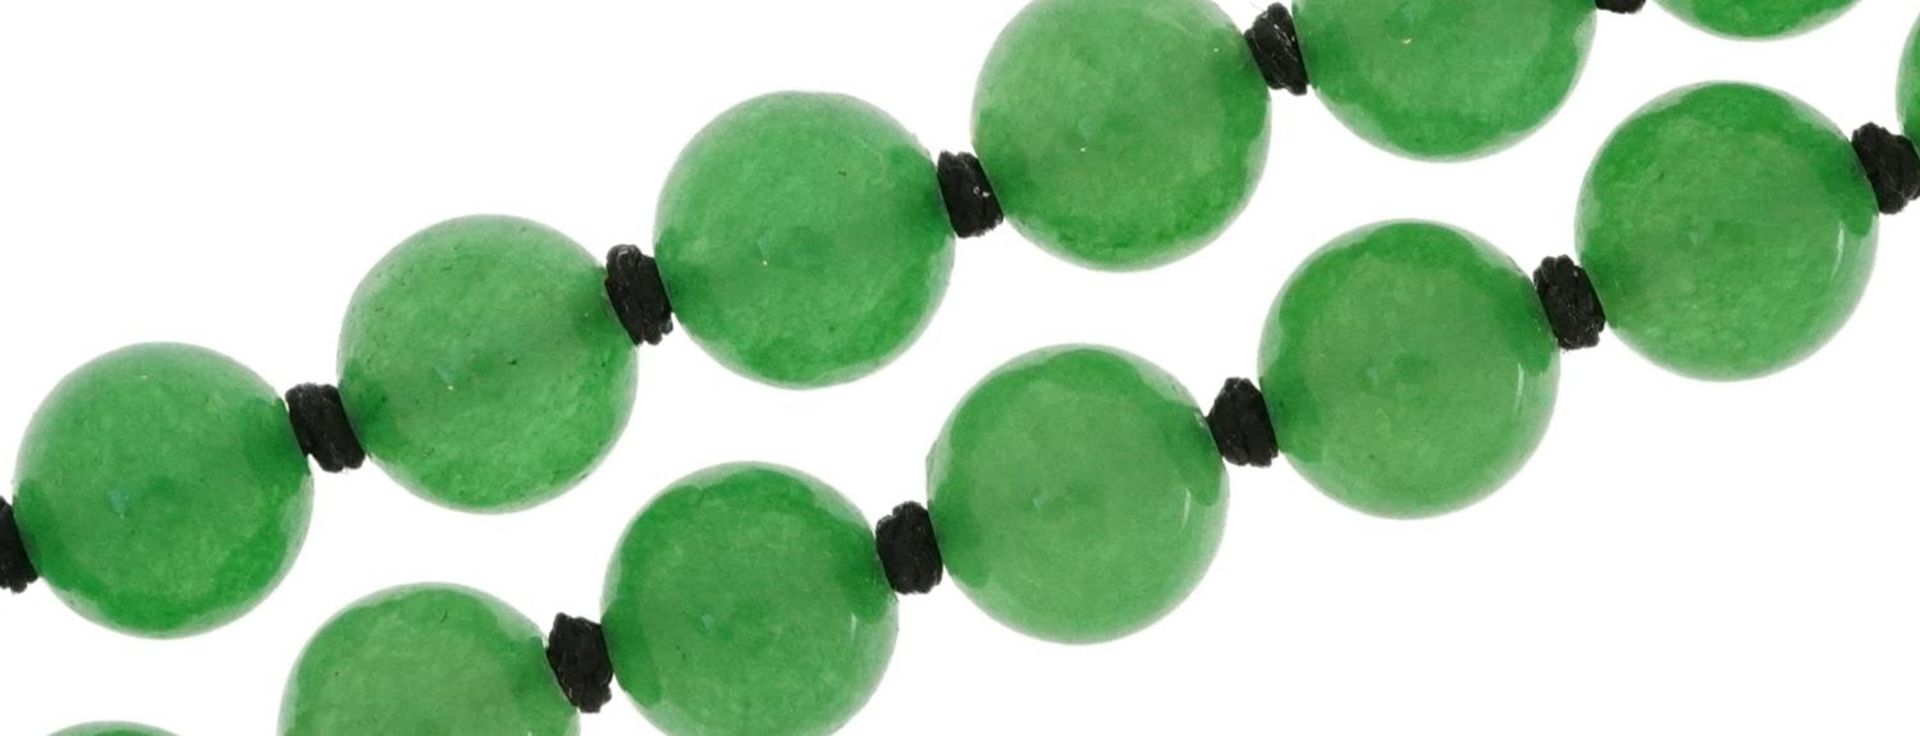 Chinese green jade bead necklace, each bead 8mm in diameter, overall 68cm in length, 56.8g